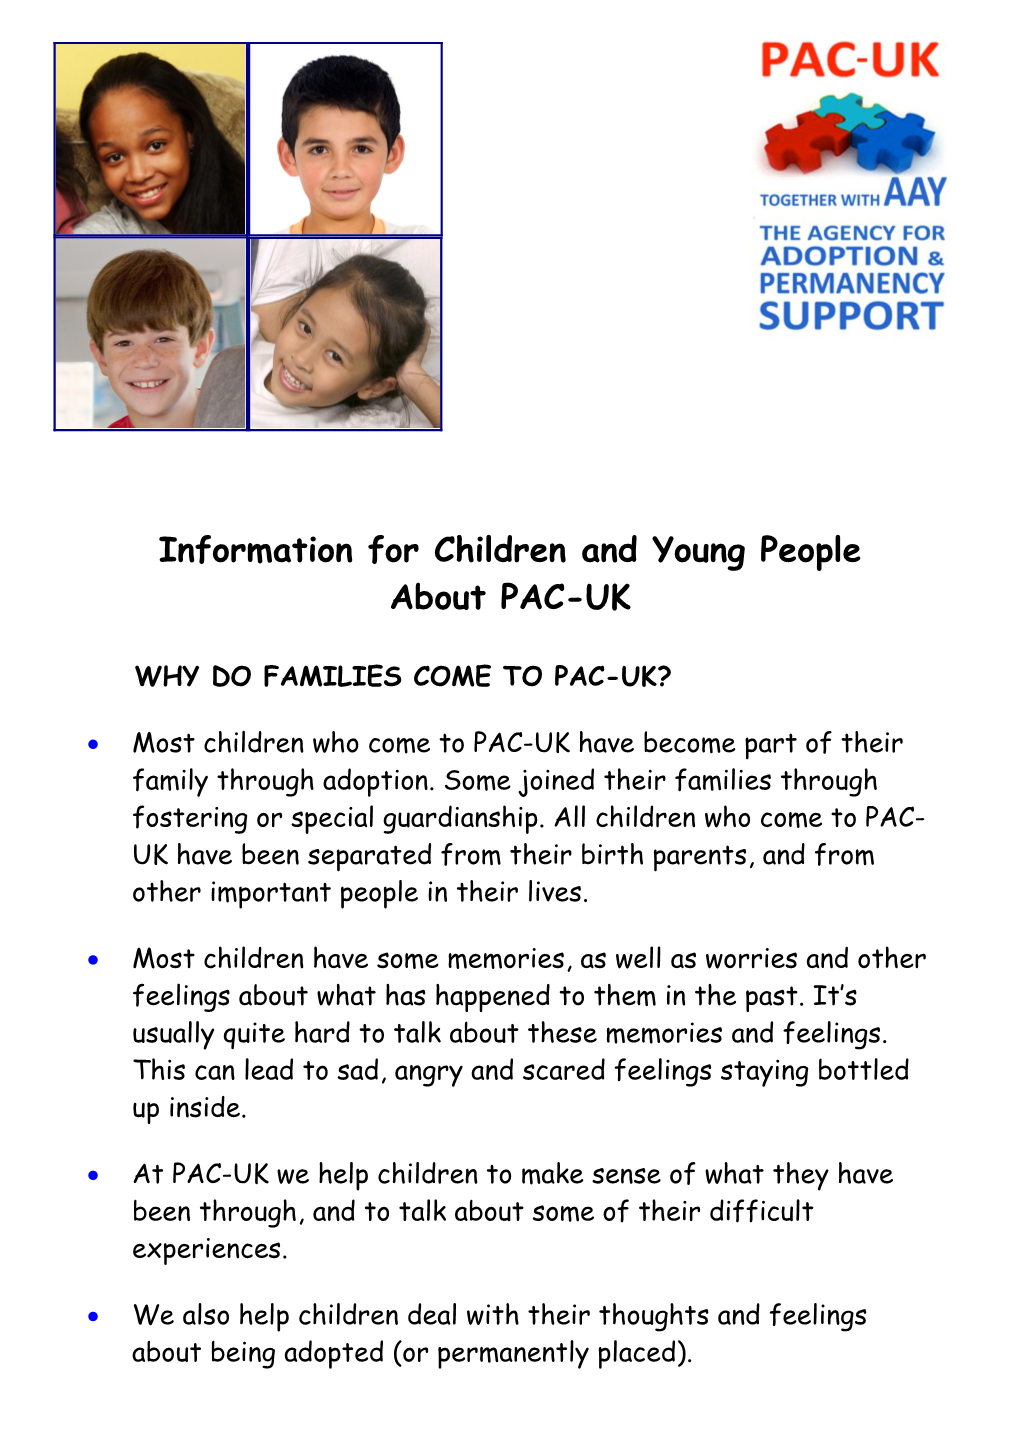 Information for Children and Young People